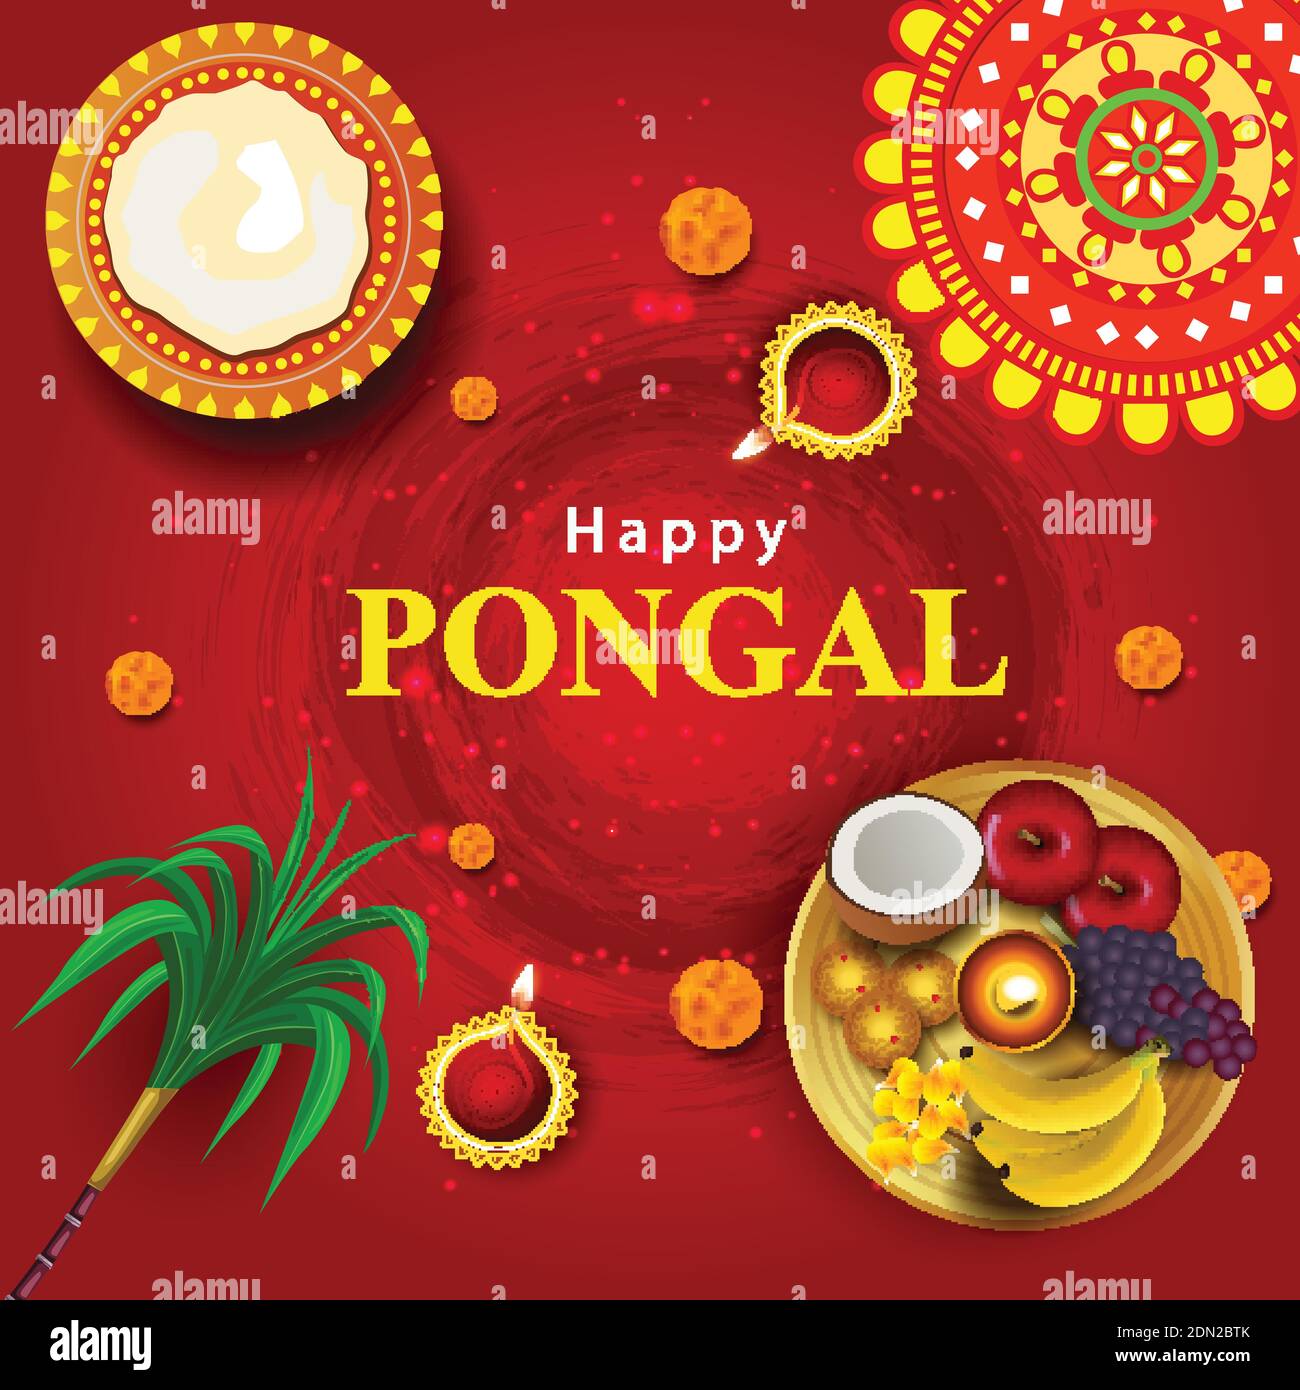 South Indian harvesting festival, Happy Pongal celebrations greetings with Pongal elements, sugarcane and plate of religious props. vector illustratio Stock Vector